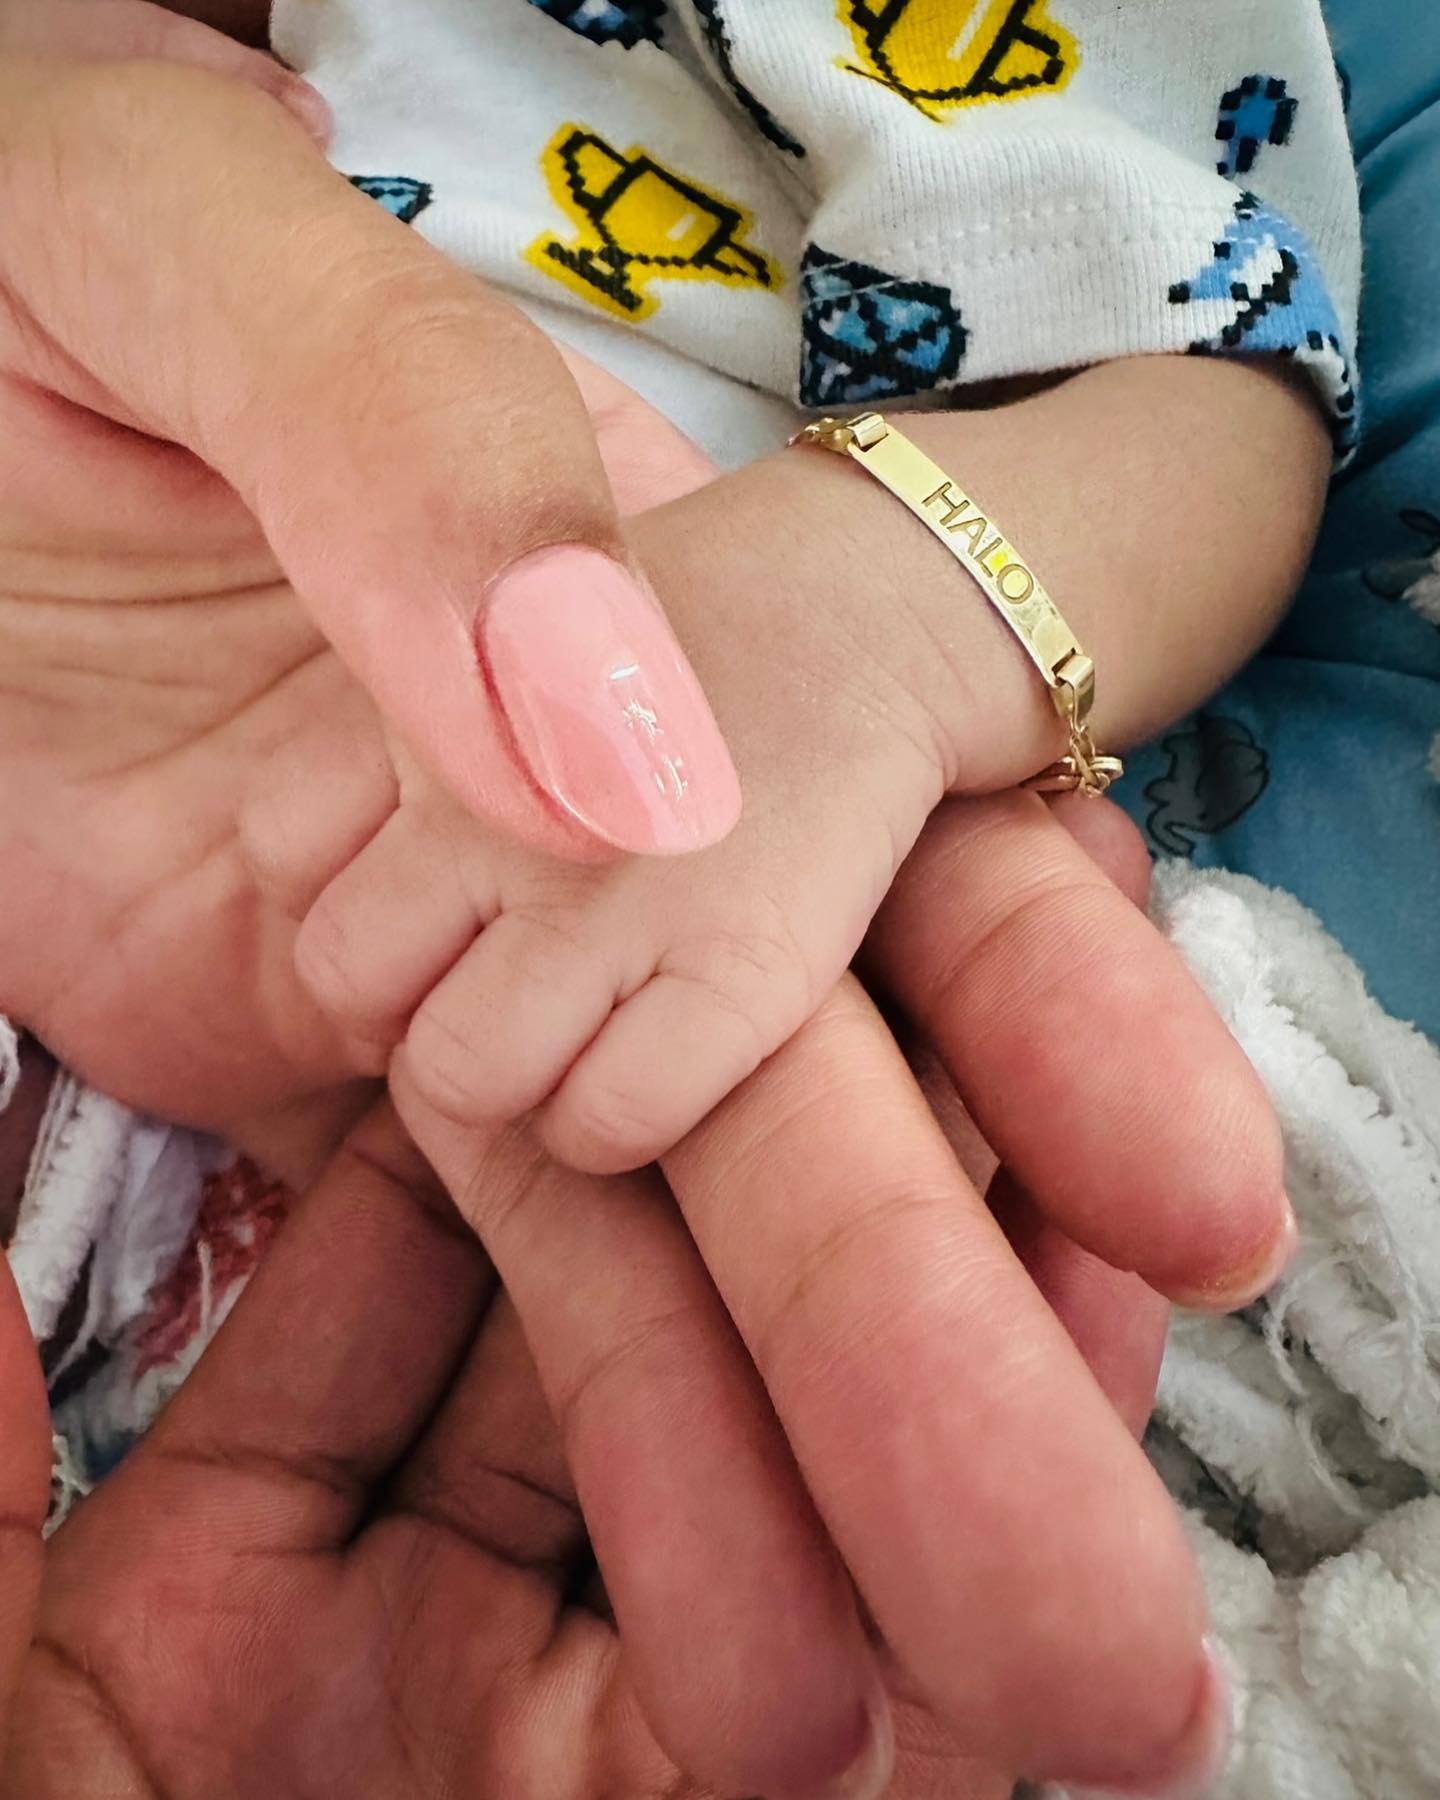 She posted a photo of her holding her baby boy's hand